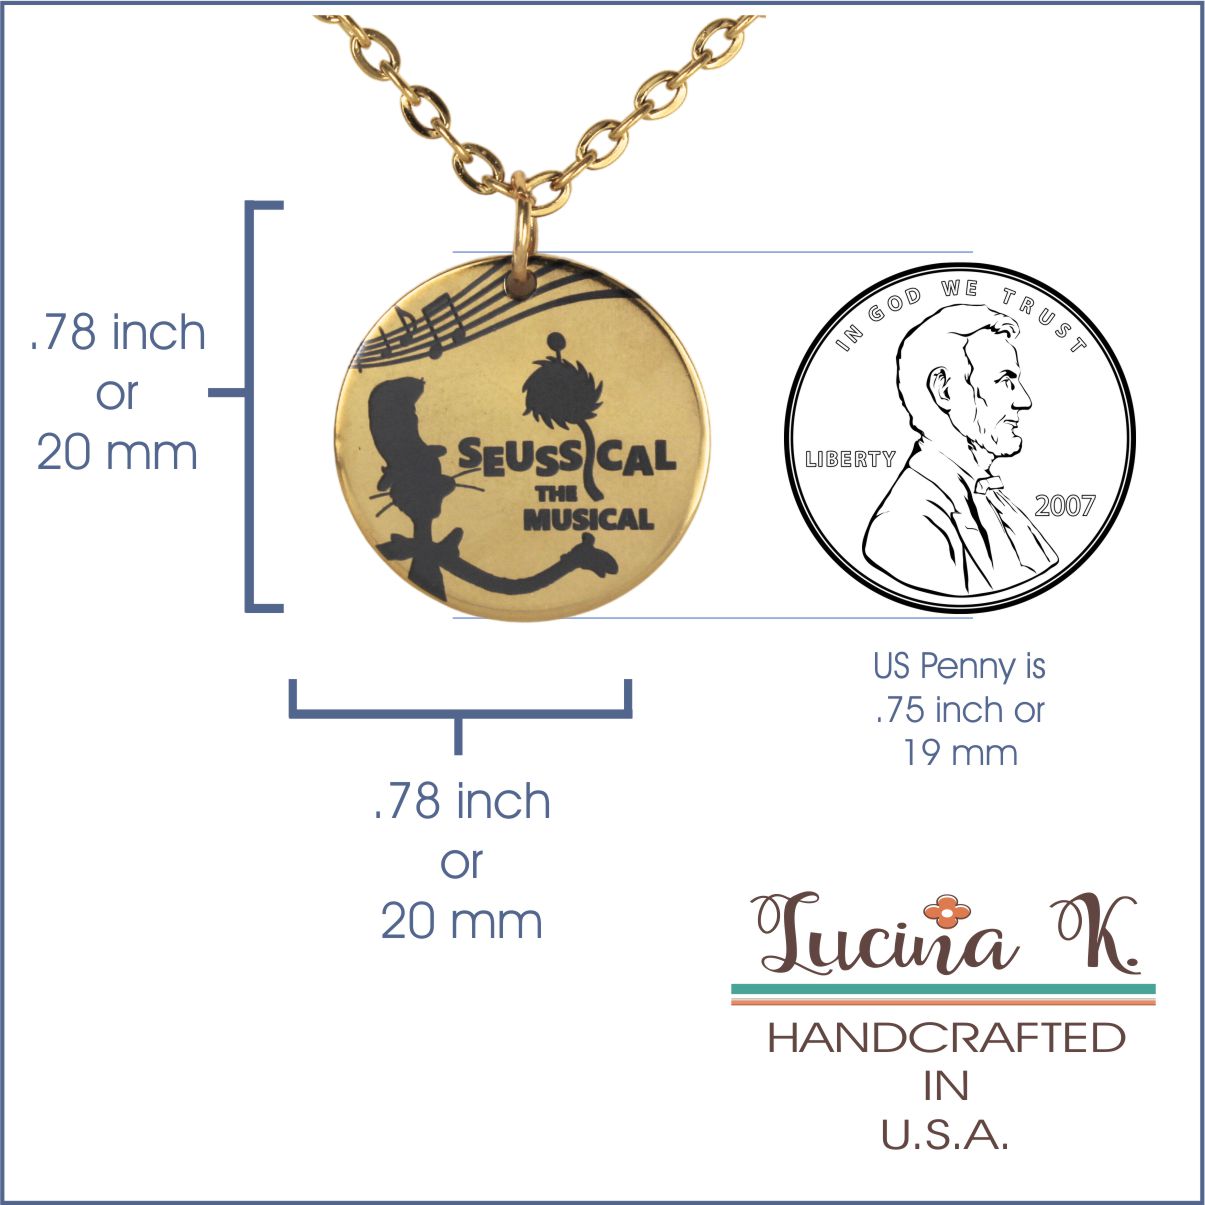 Seussical the Musical inspired necklace with virtual engraving